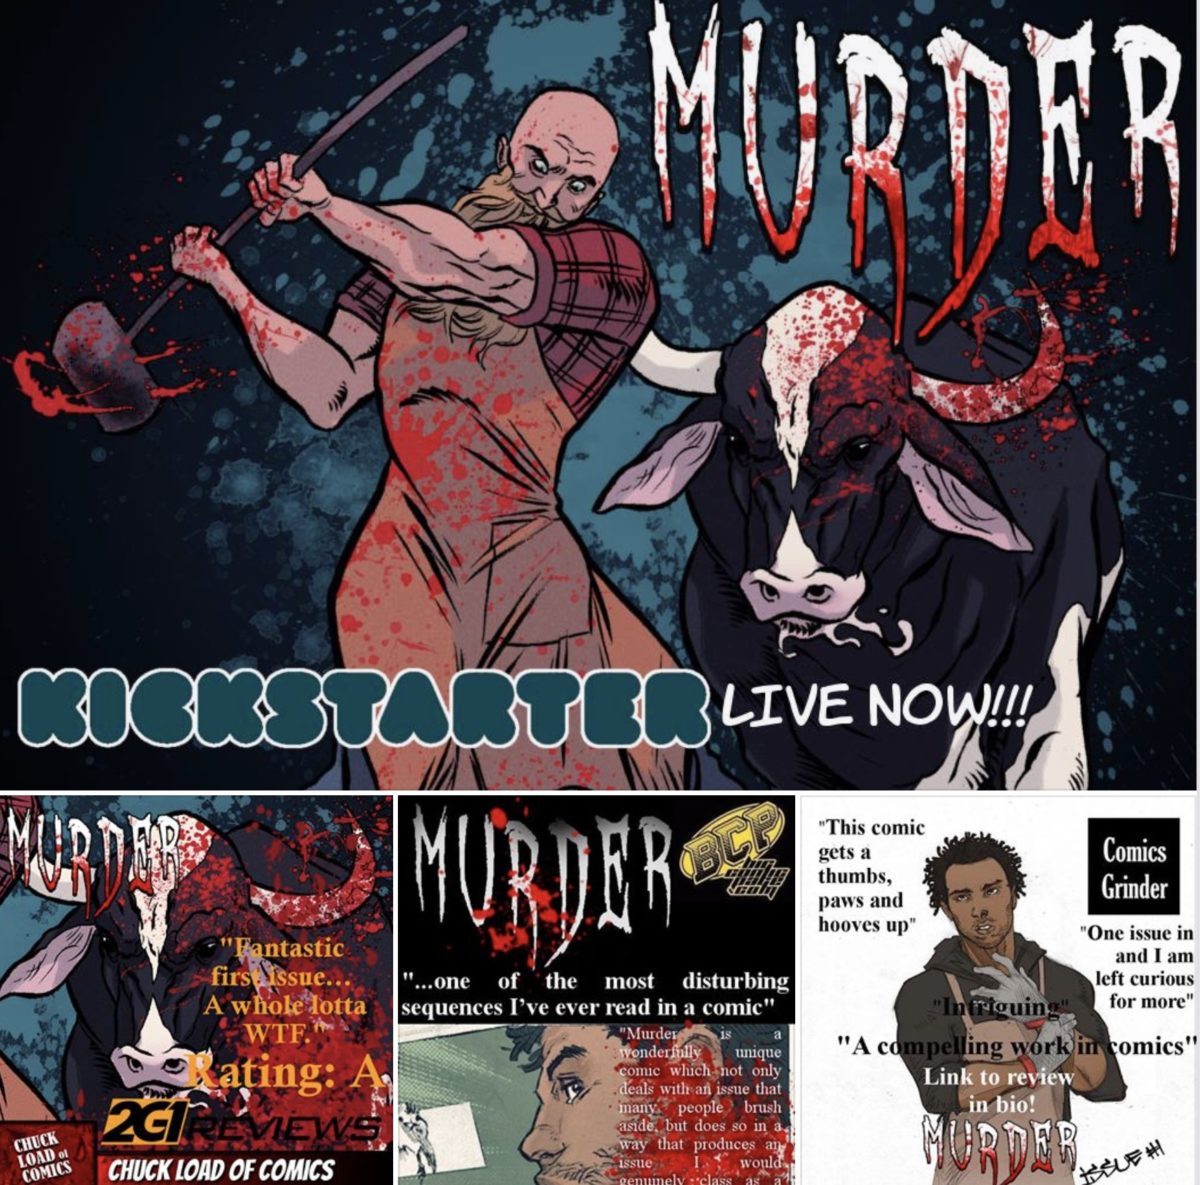 ConGrats to the Team Behind Murder Issue #1 for Killing it on KICKSTARTER